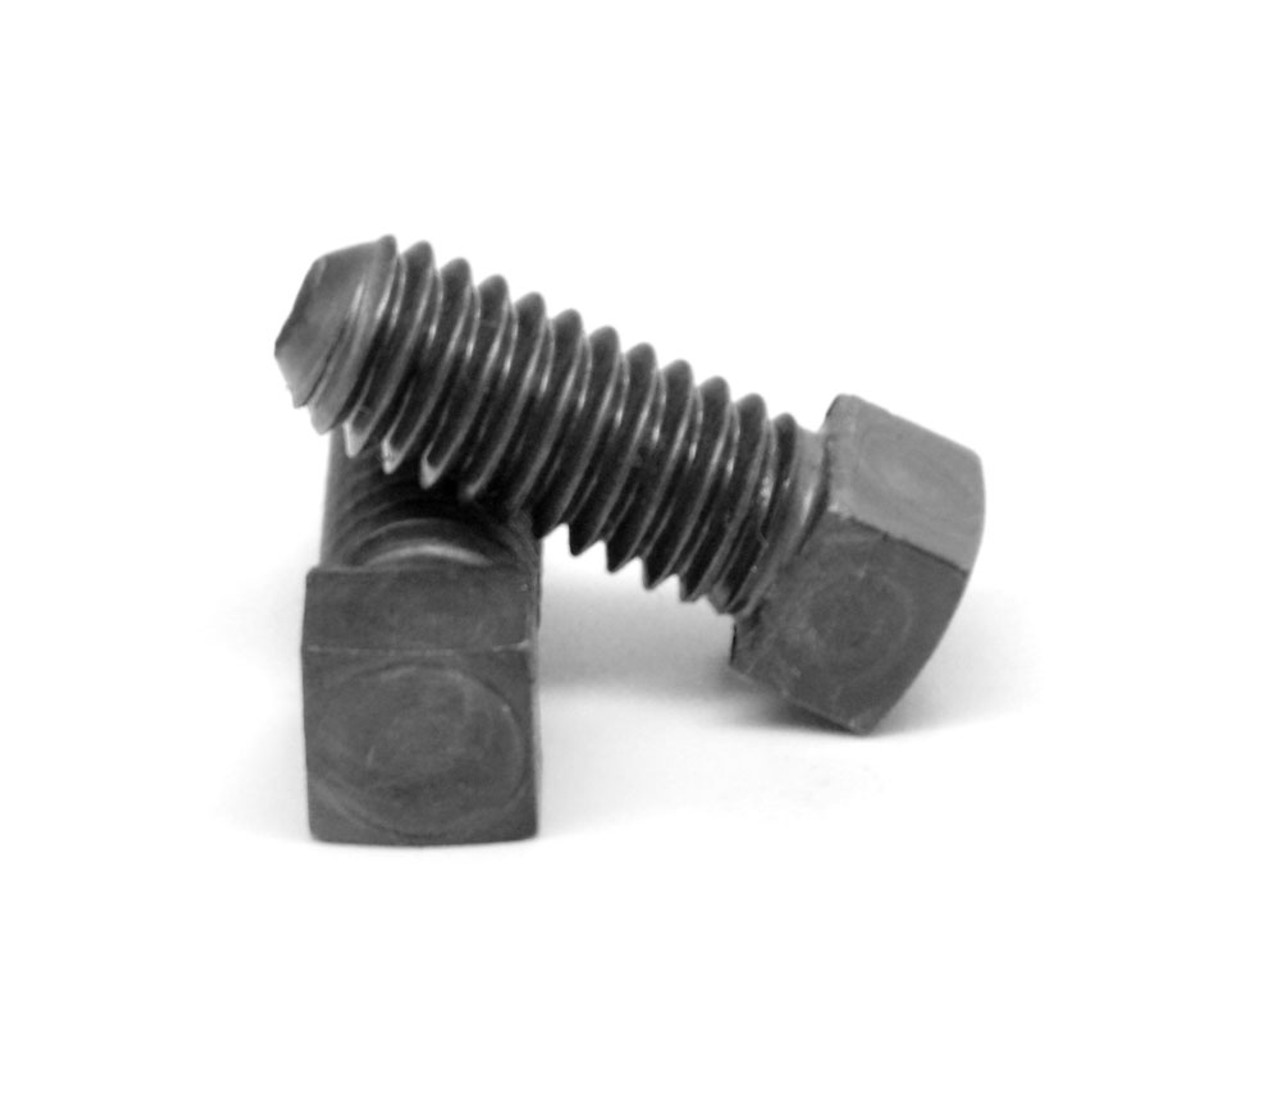 5/16"-18 x 1" (FT) Coarse Thread Square Head Set Screw Oval Point Low Carbon Steel Case Hardened Plain Finish